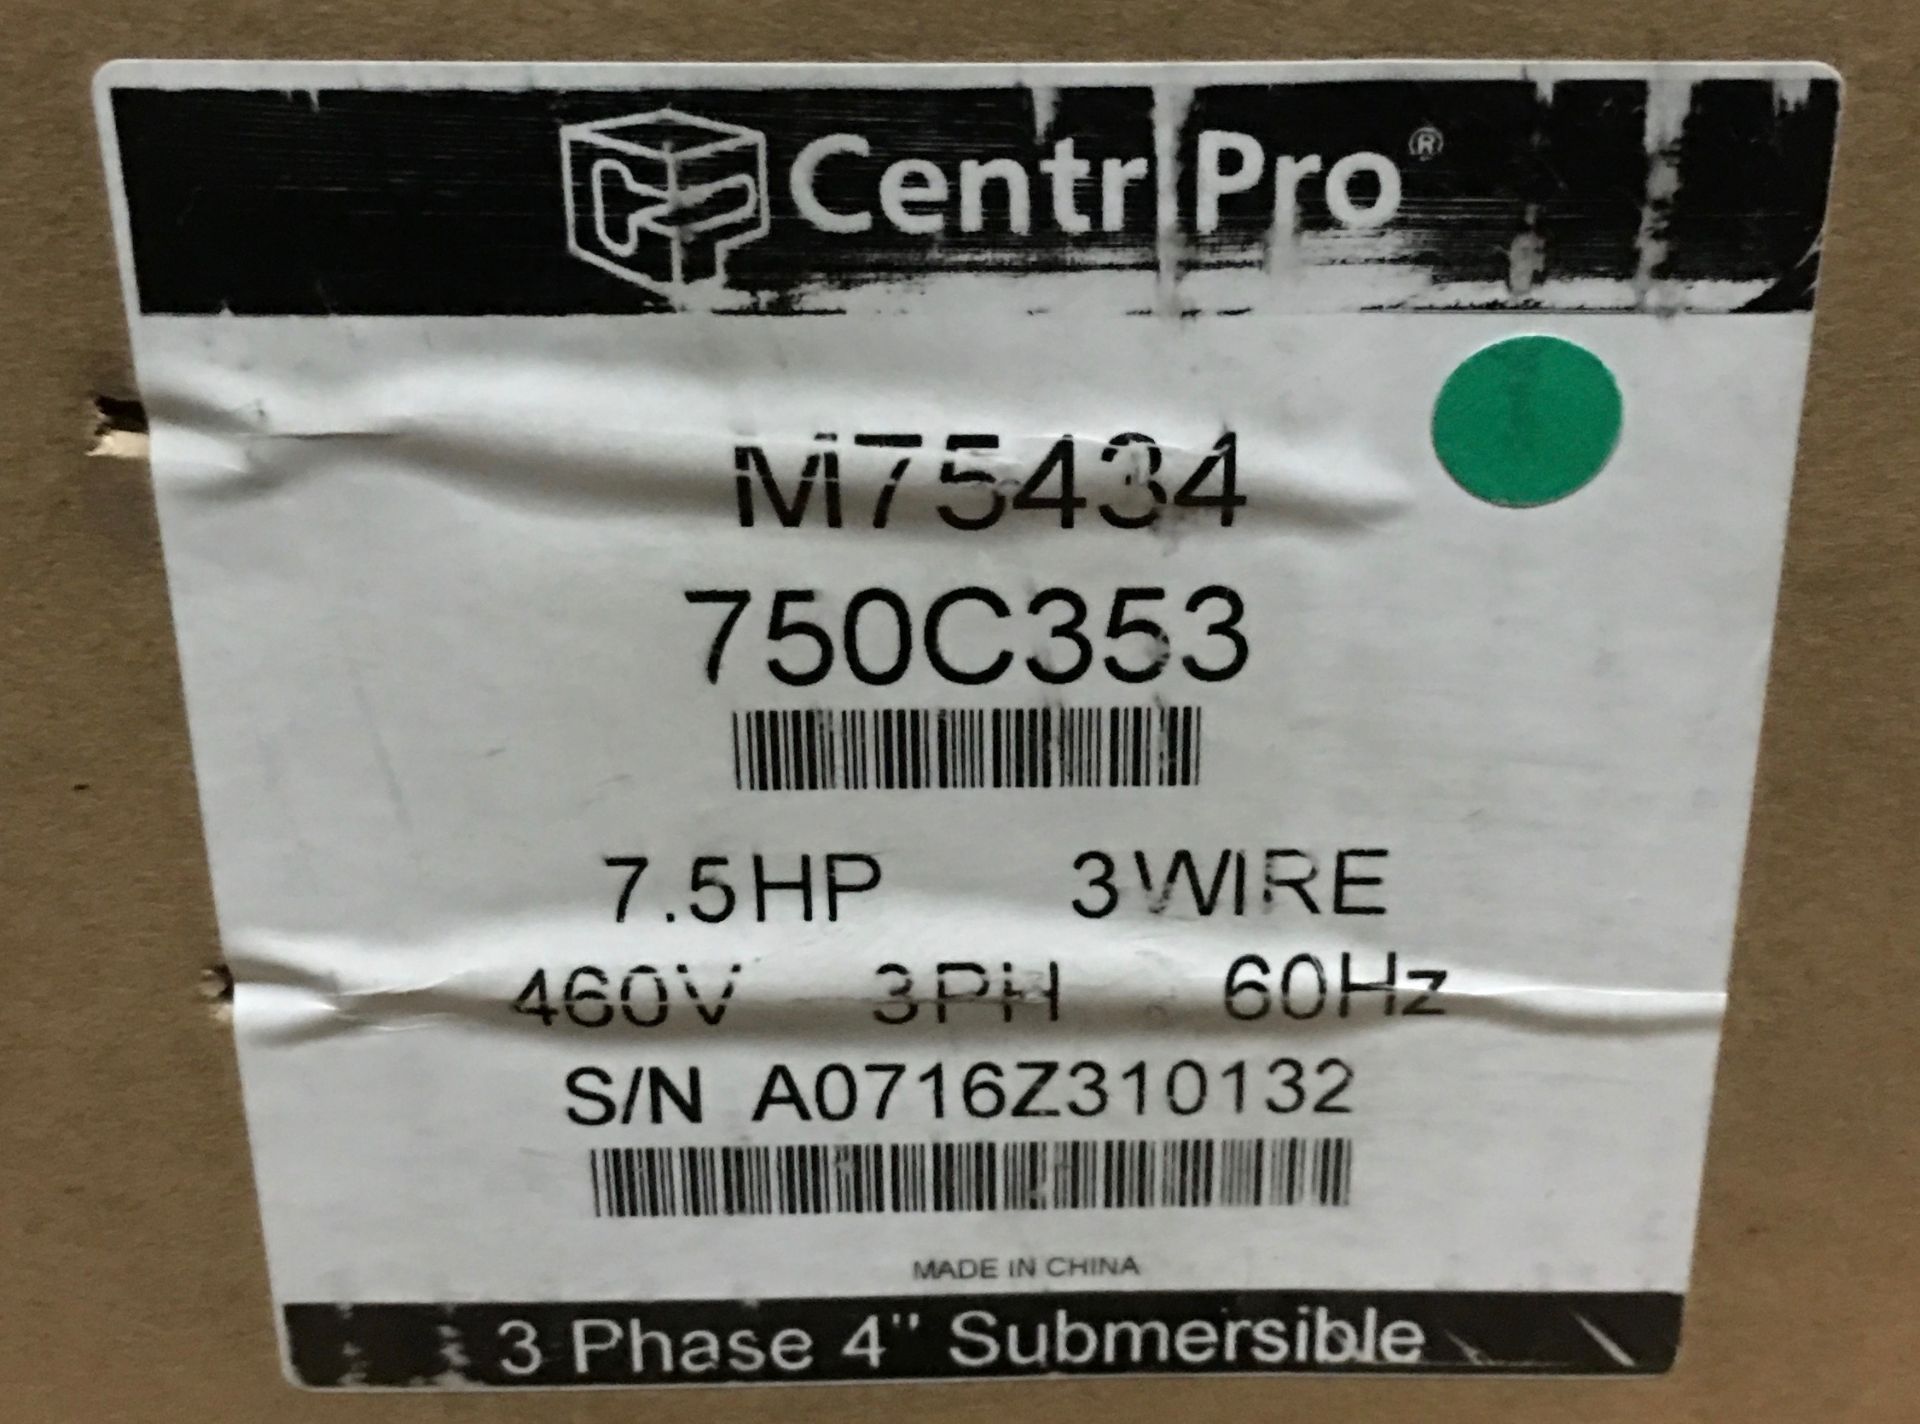 CentriPro Model M75434 750C353 7.5 HP 3 Phase 4" Submersible Motor 460 Volts 60 HZ - New, never - Image 2 of 3